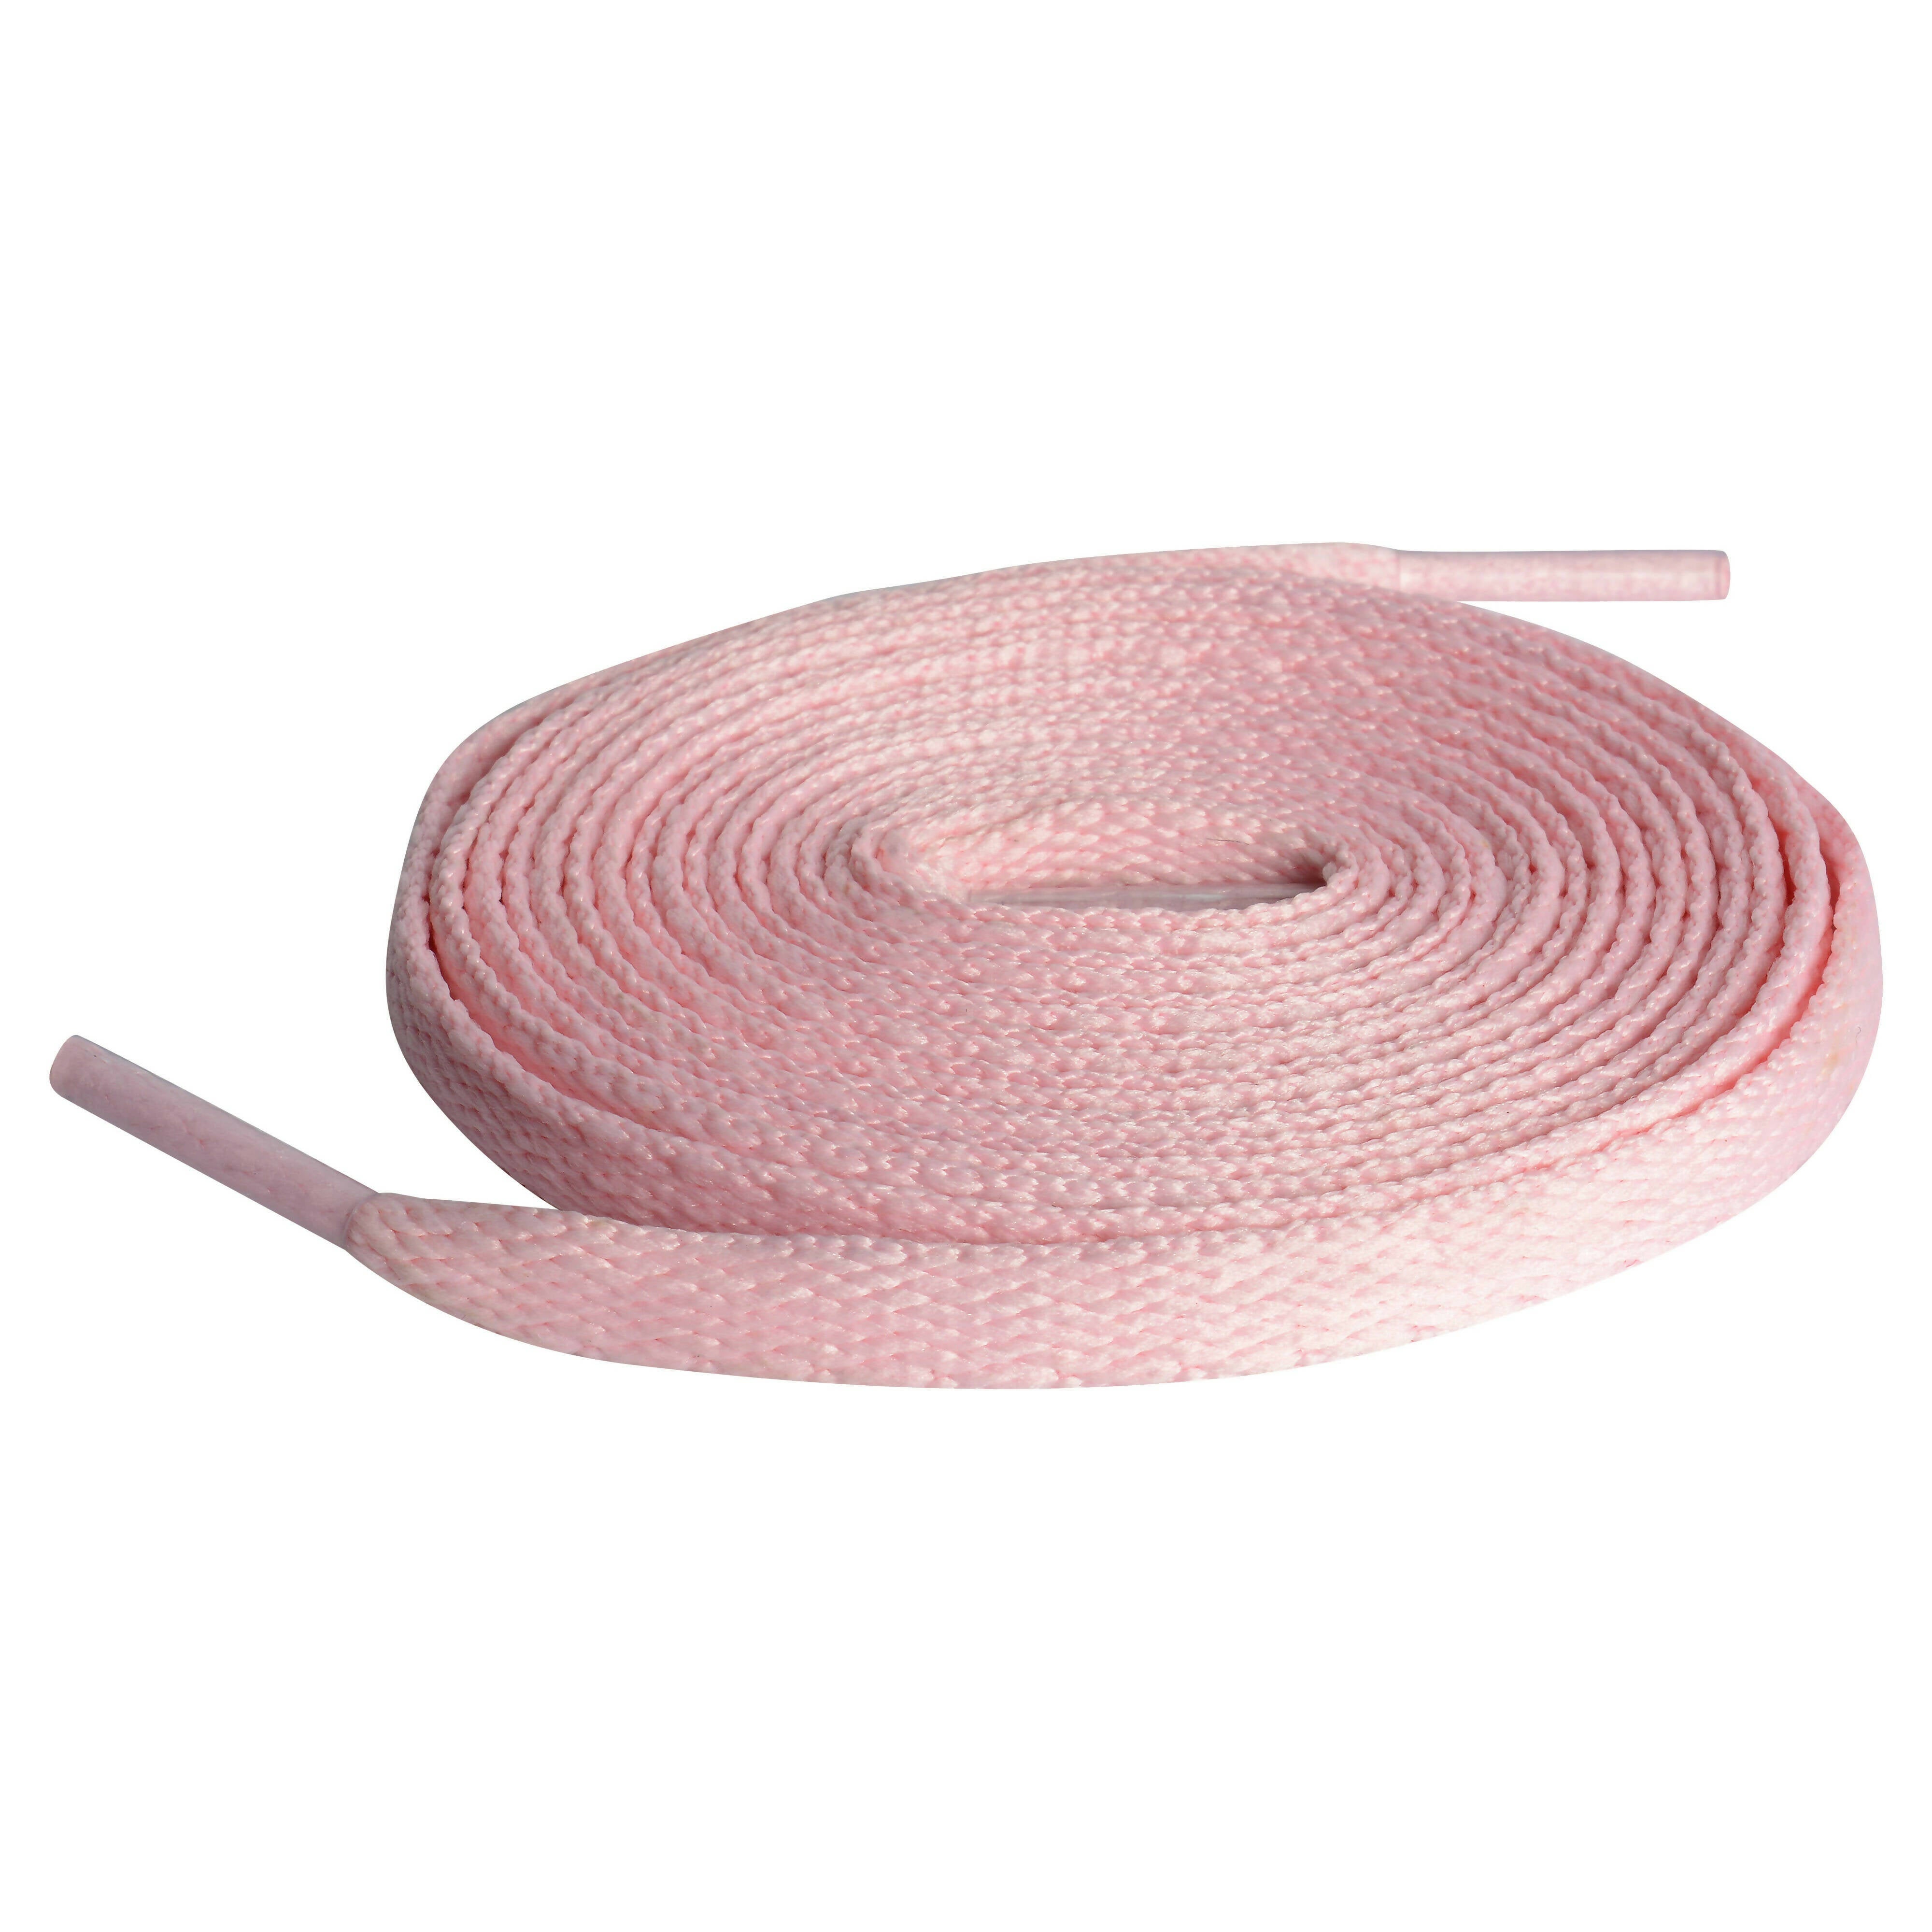 Flat Laces Pack of 2 (Soft pink,white)